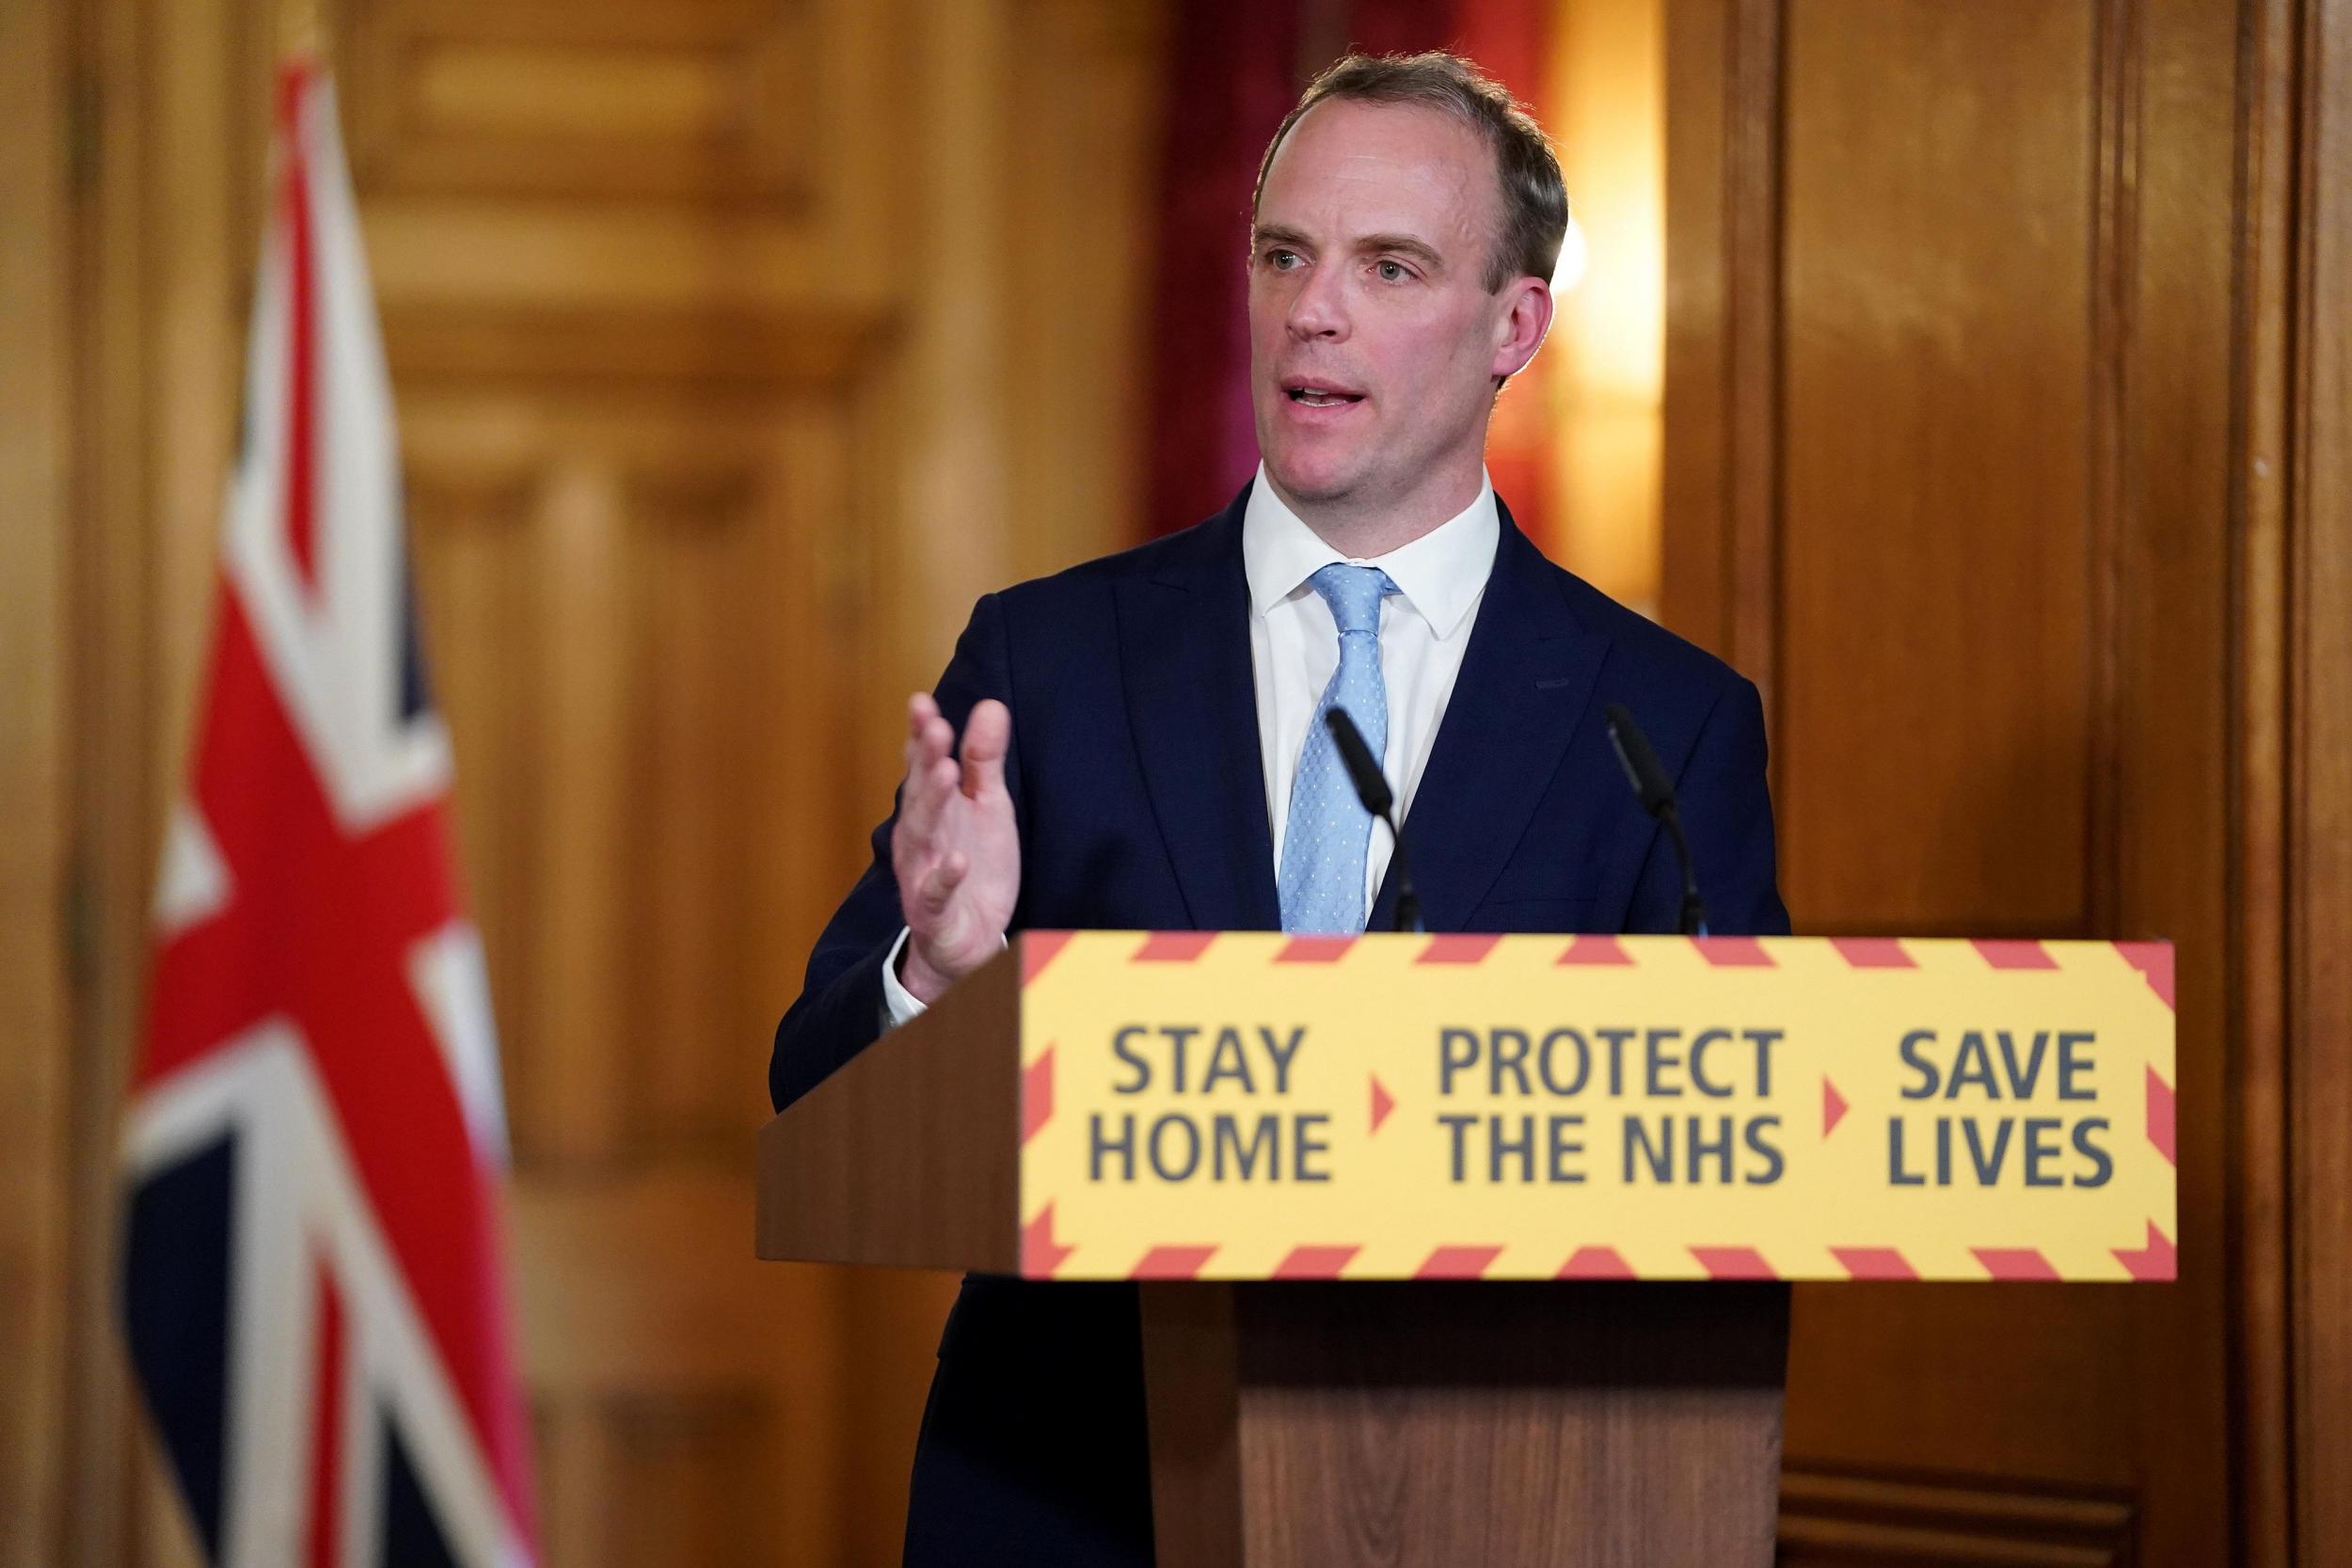 The prime minister's colleagues, like Dominic Raab, have to step up in his absence